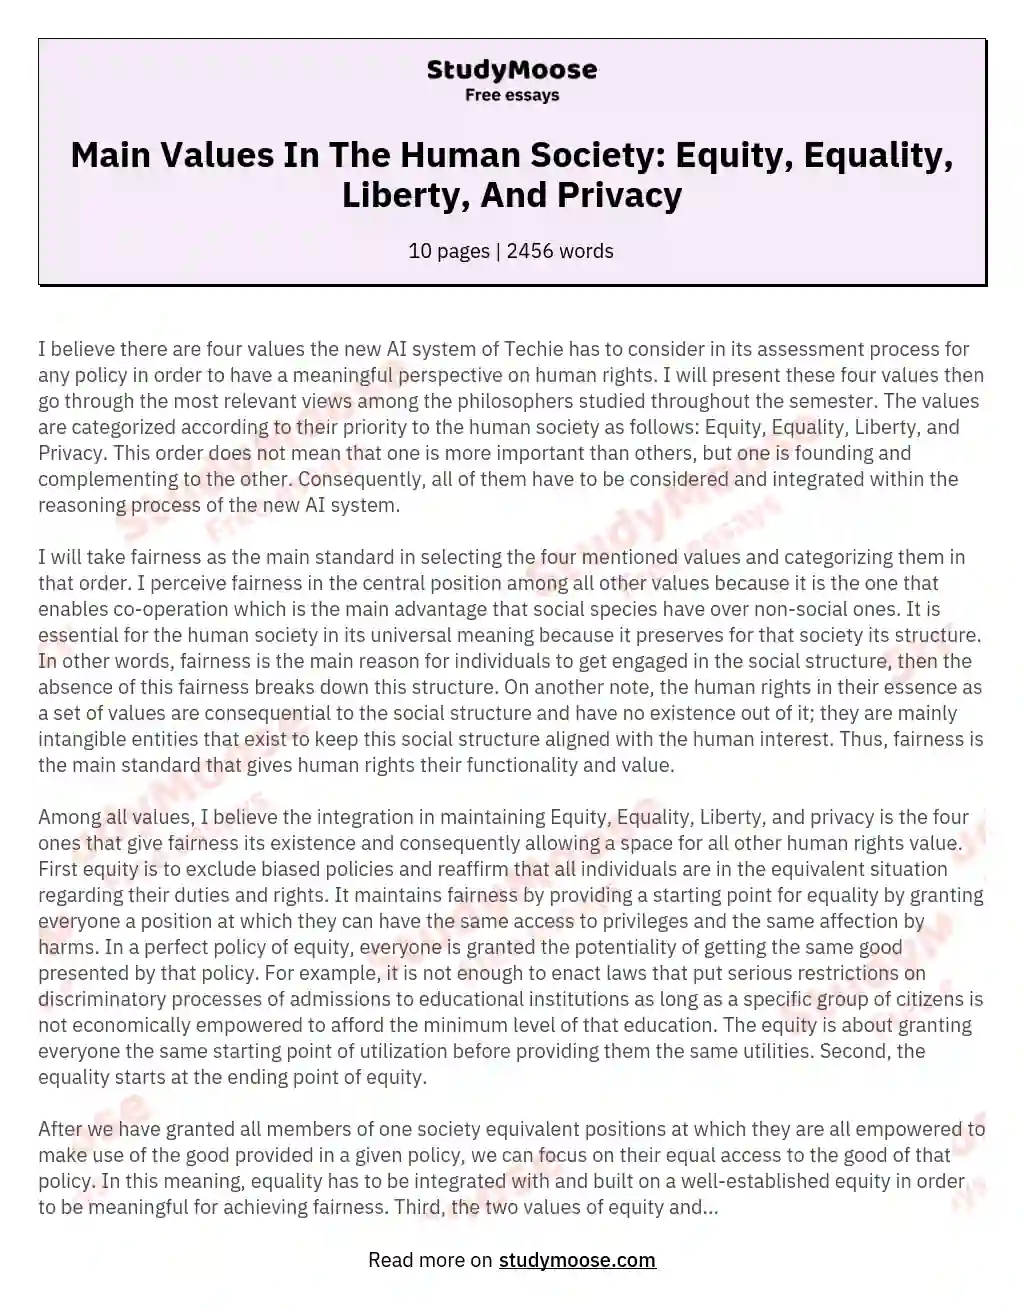 Main Values In The Human Society: Equity, Equality, Liberty, And Privacy essay